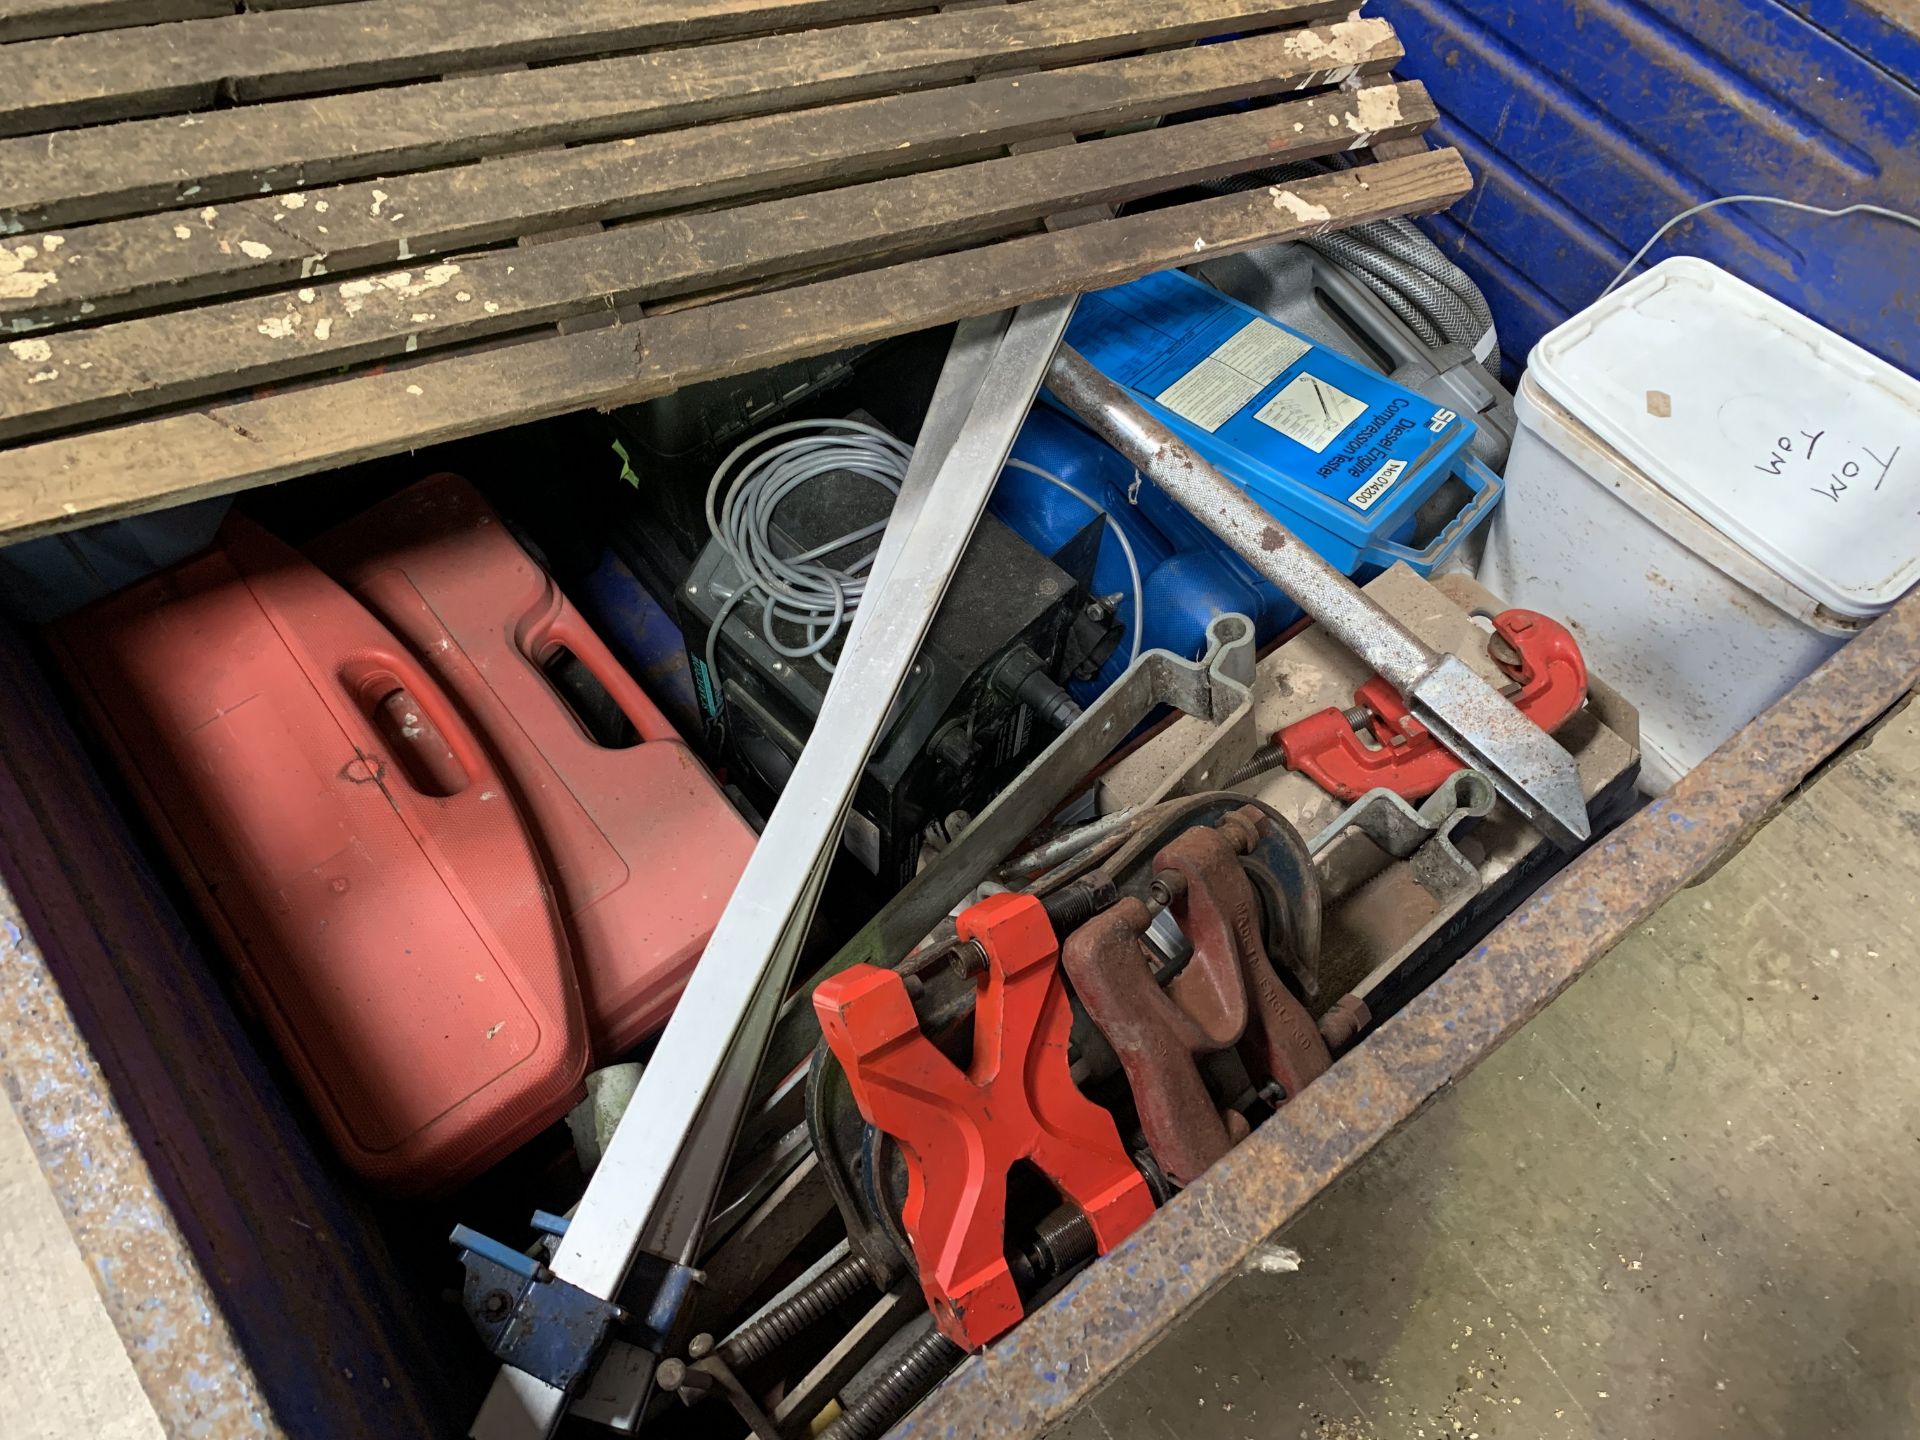 Crate of tools - Image 2 of 2